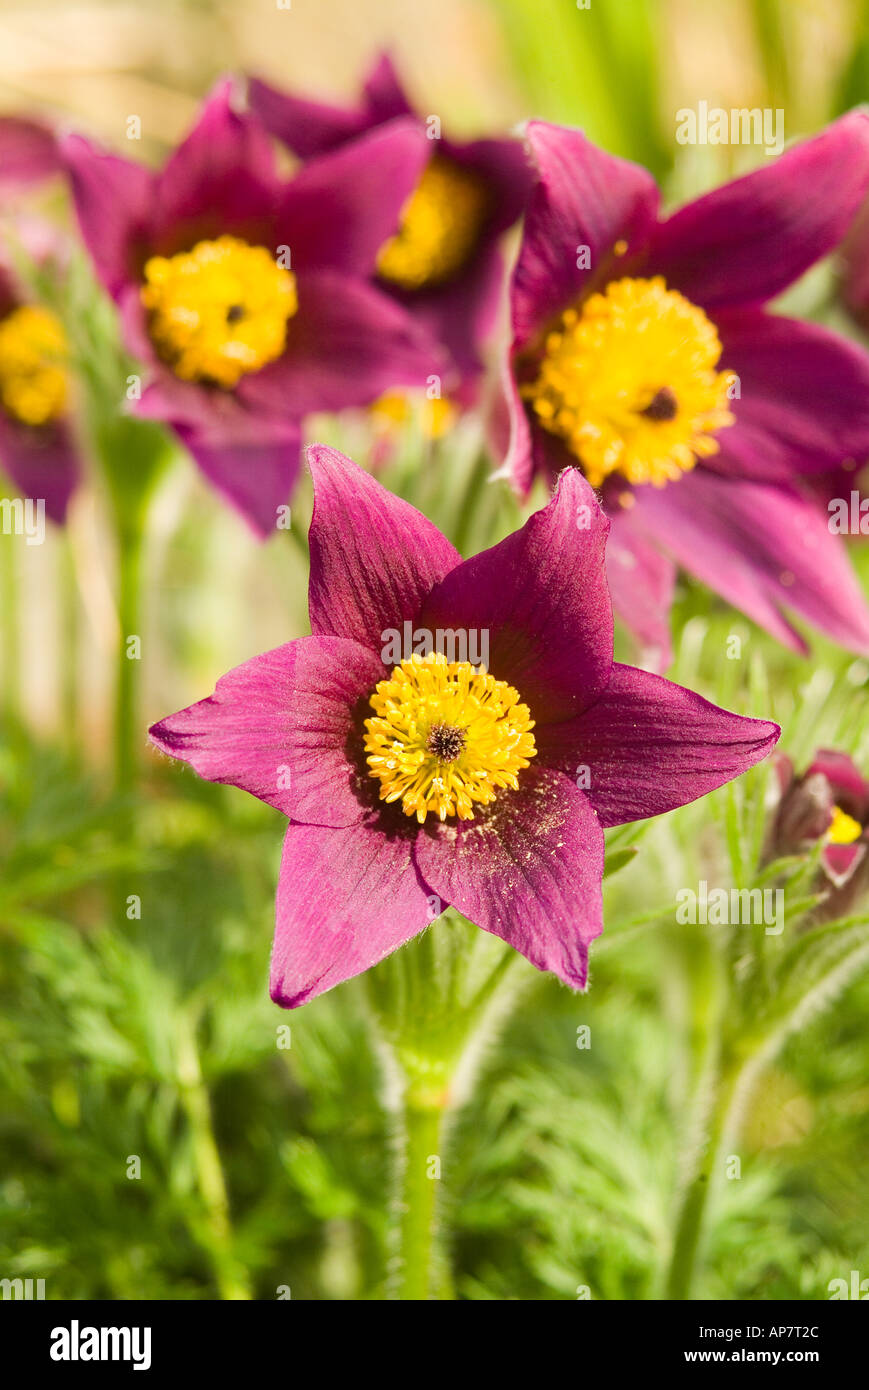 The Pasque flower a tundra plant of the ranunculi family also known as wind crocus said to be useful in treating eye diseases such as cataracts Stock Photo